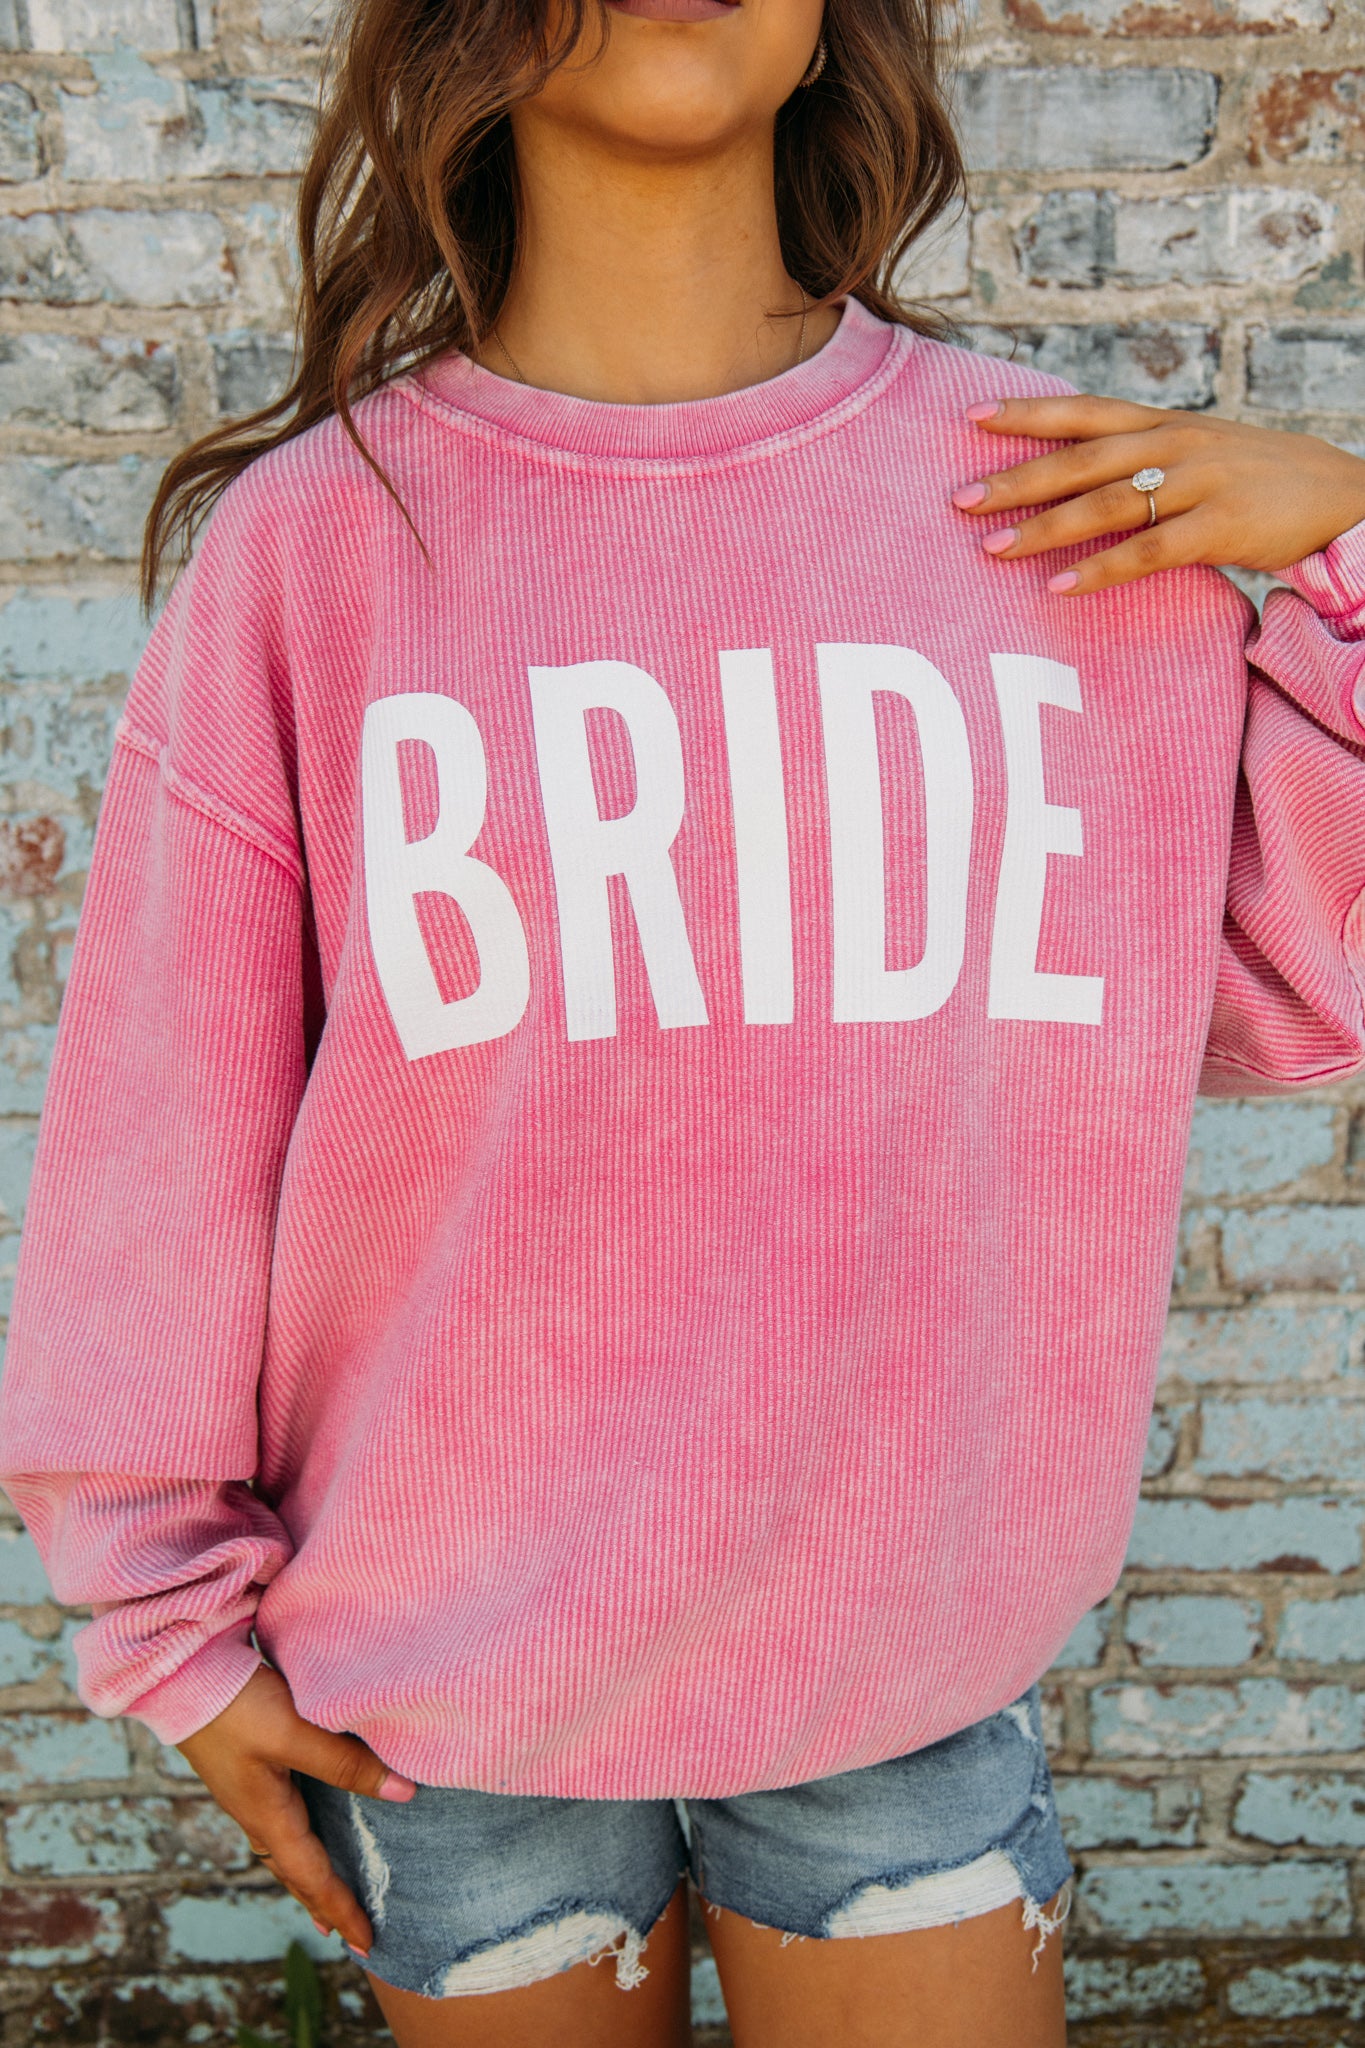 Calling all brides!! This corded sweatshirt is for you! This pink color is so fun and can pair well with denim, shorts, or leggings! This is the perfect gift for someone you know who is getting married...or if it's you, then treat yourself girl! 